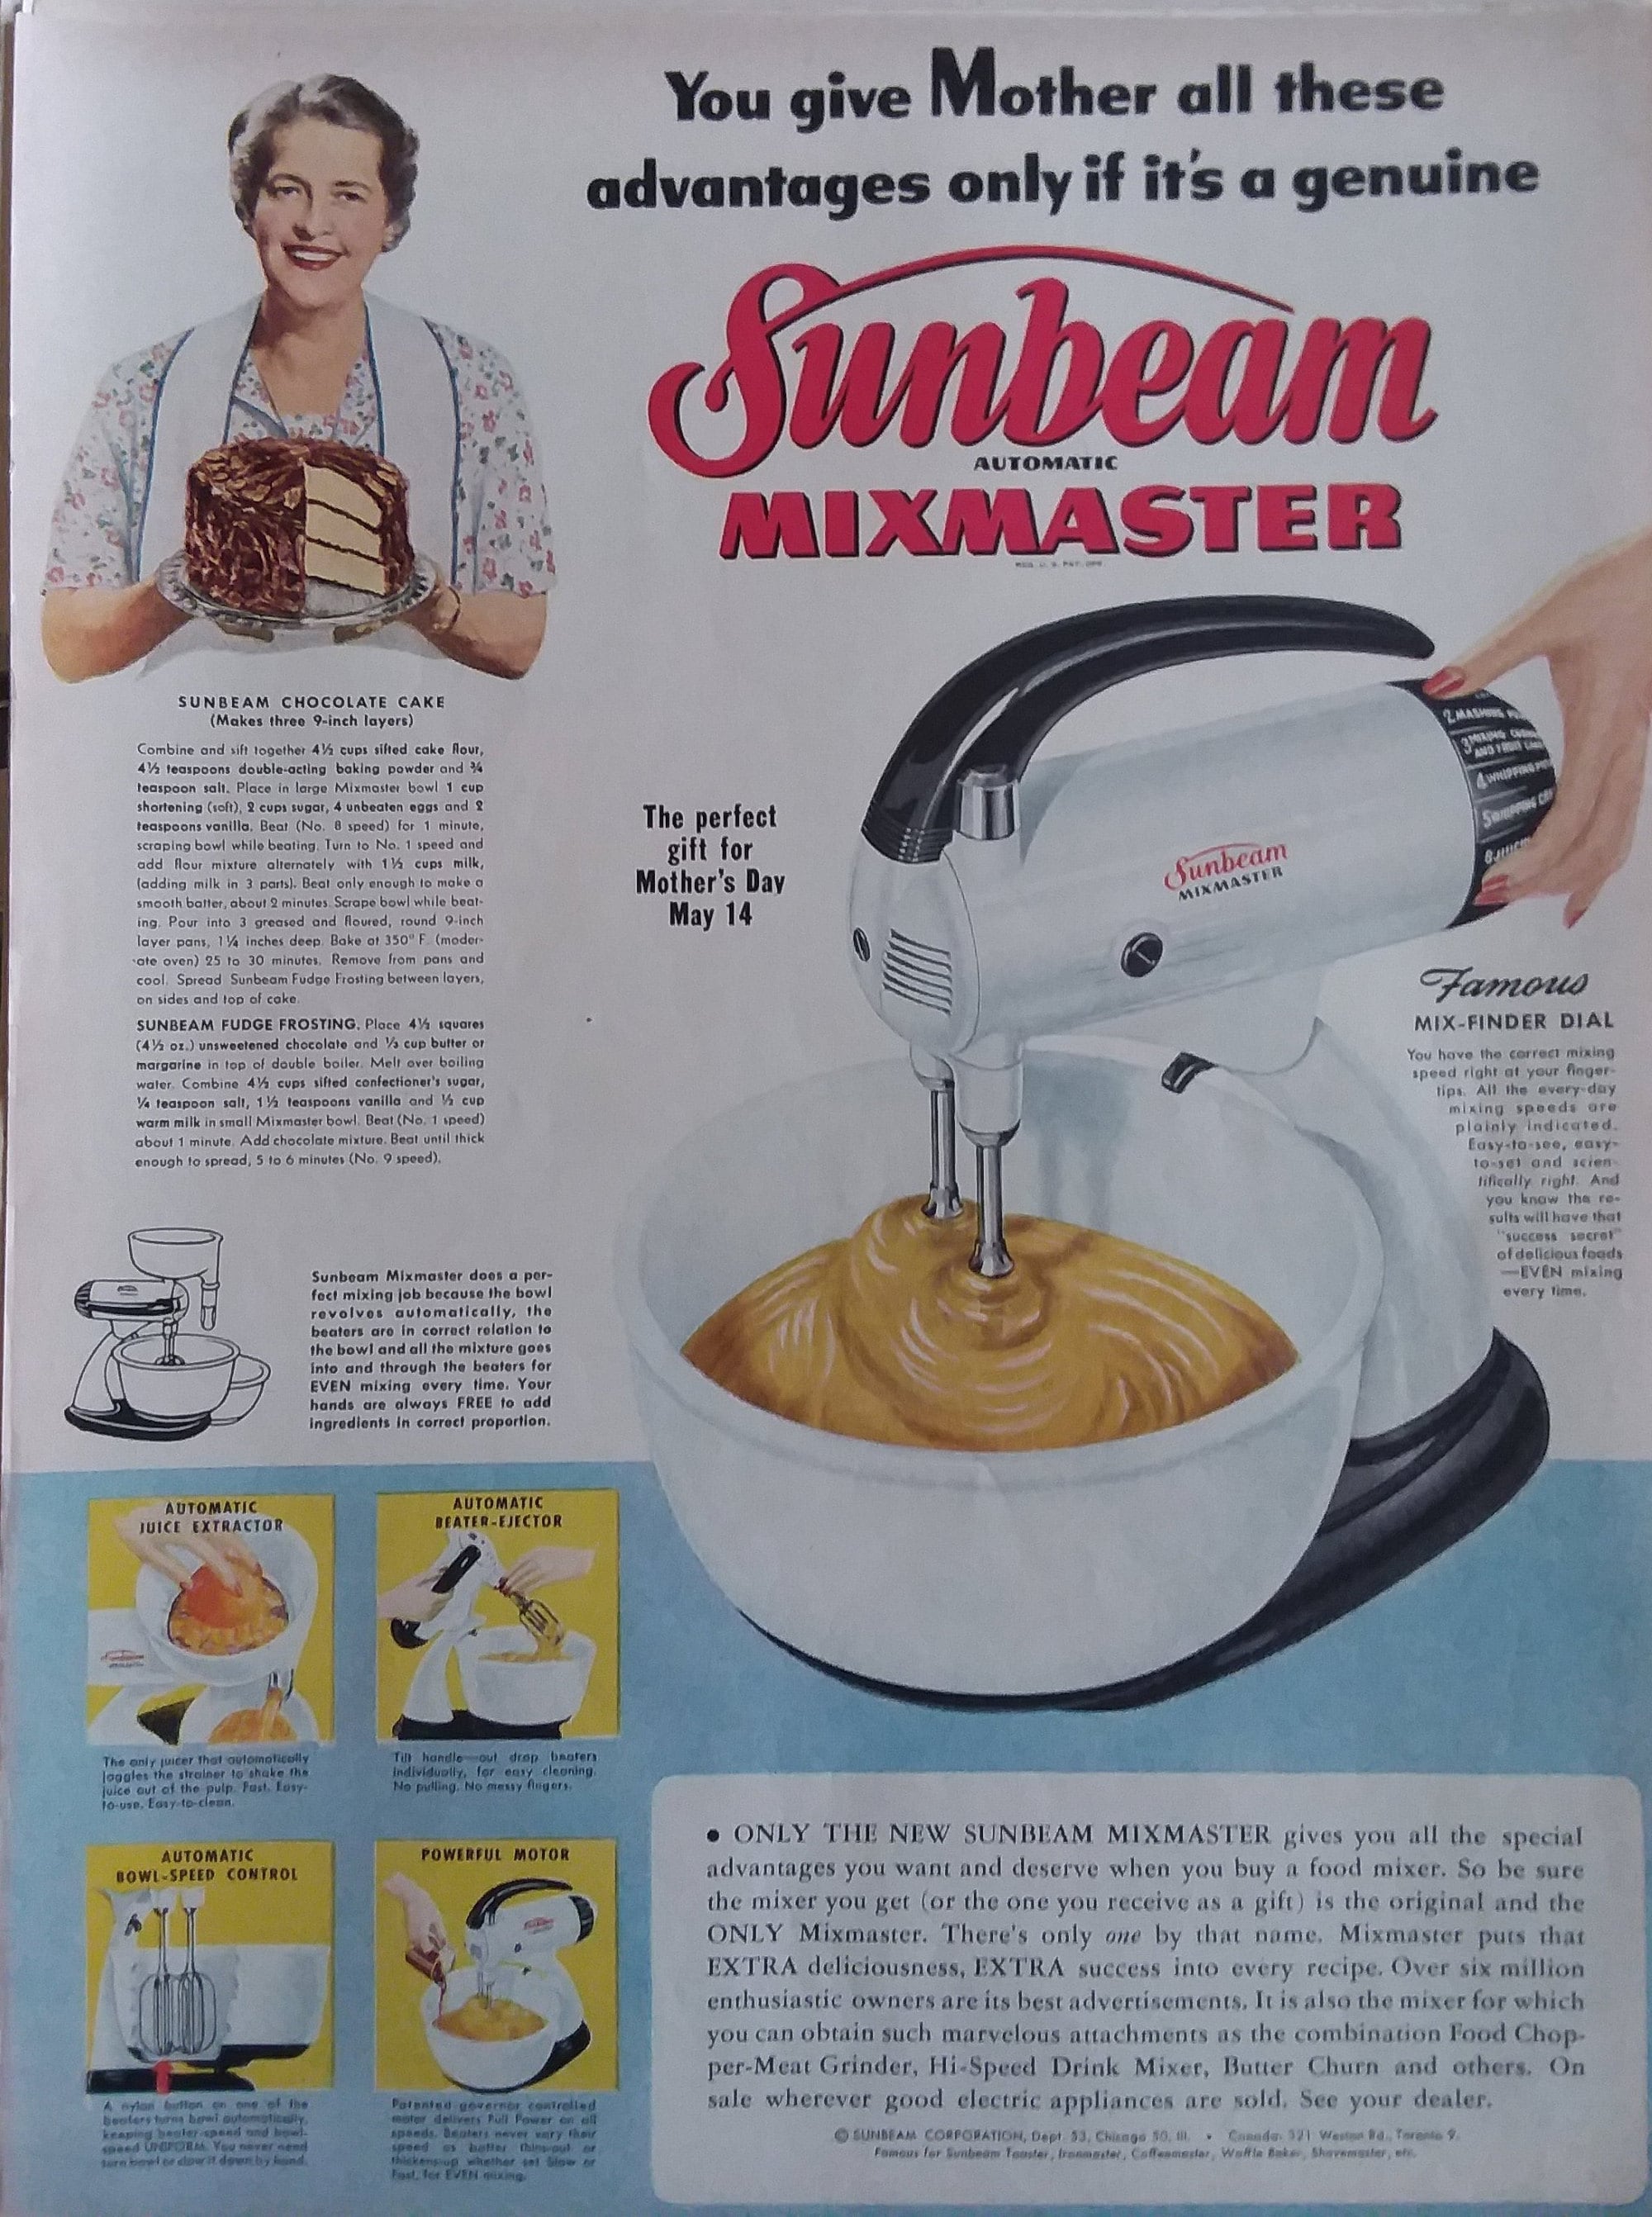 Old House Handyman: Fixing old Mixmaster proves value of 1950s tech